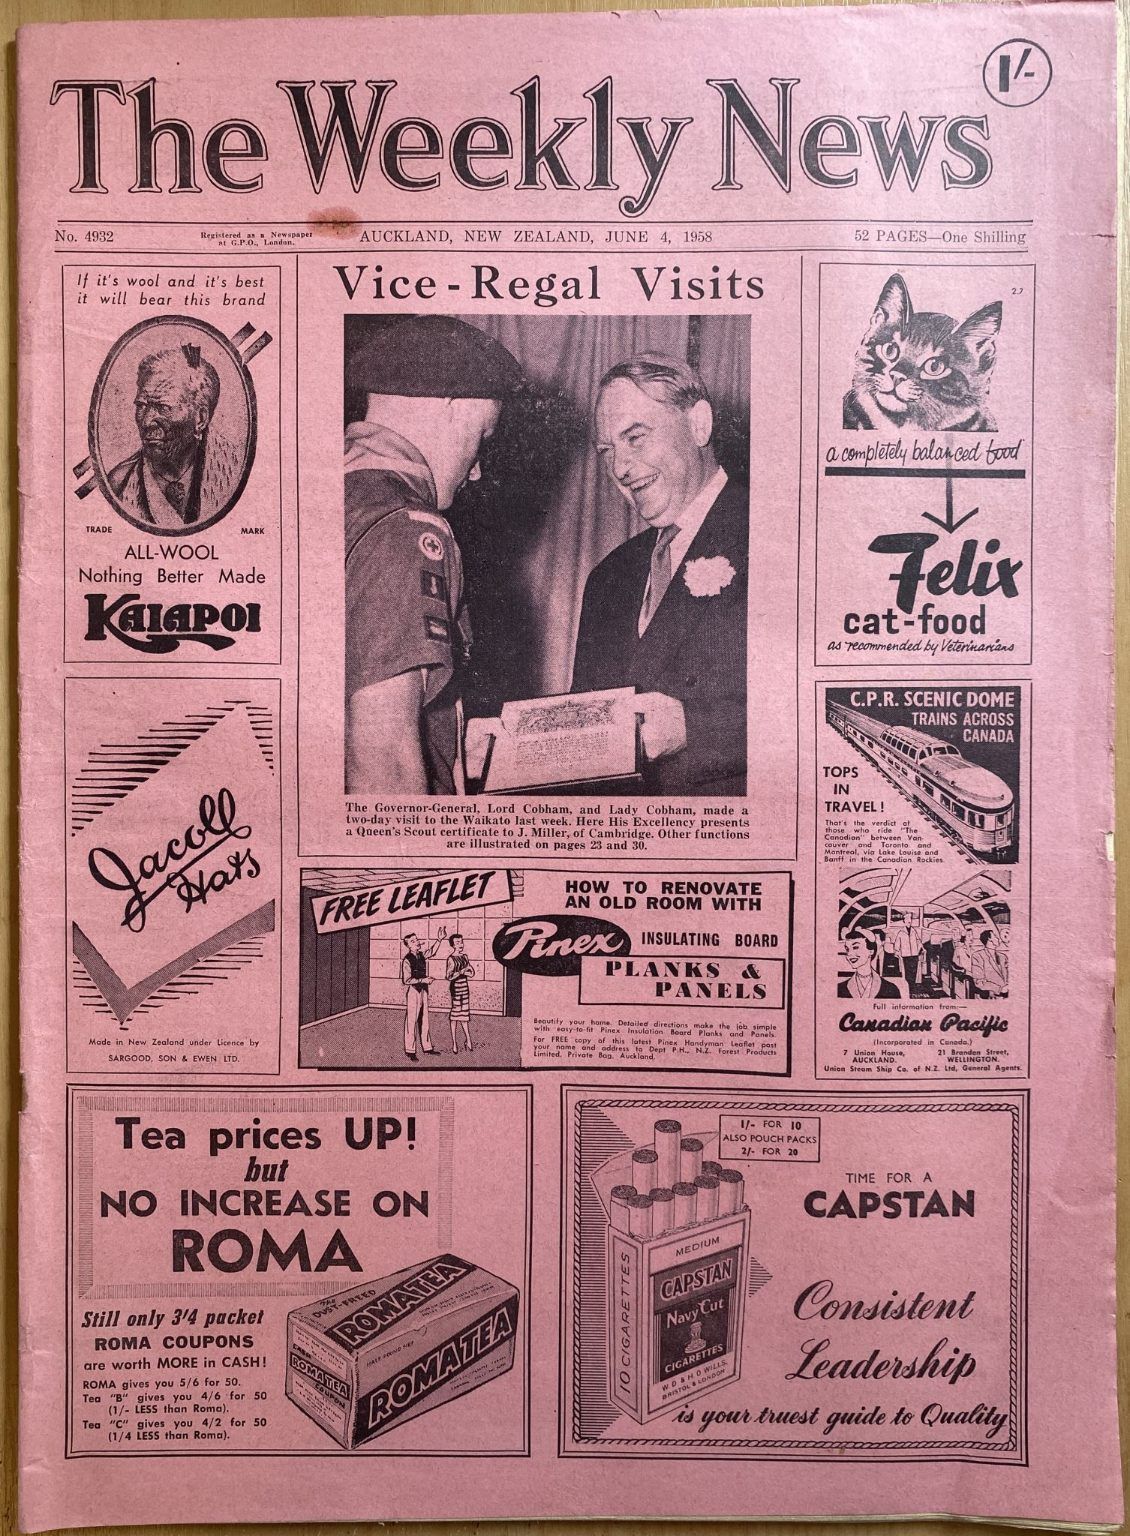 OLD NEWSPAPER: The Weekly News, No. 4932, 4 June 1958